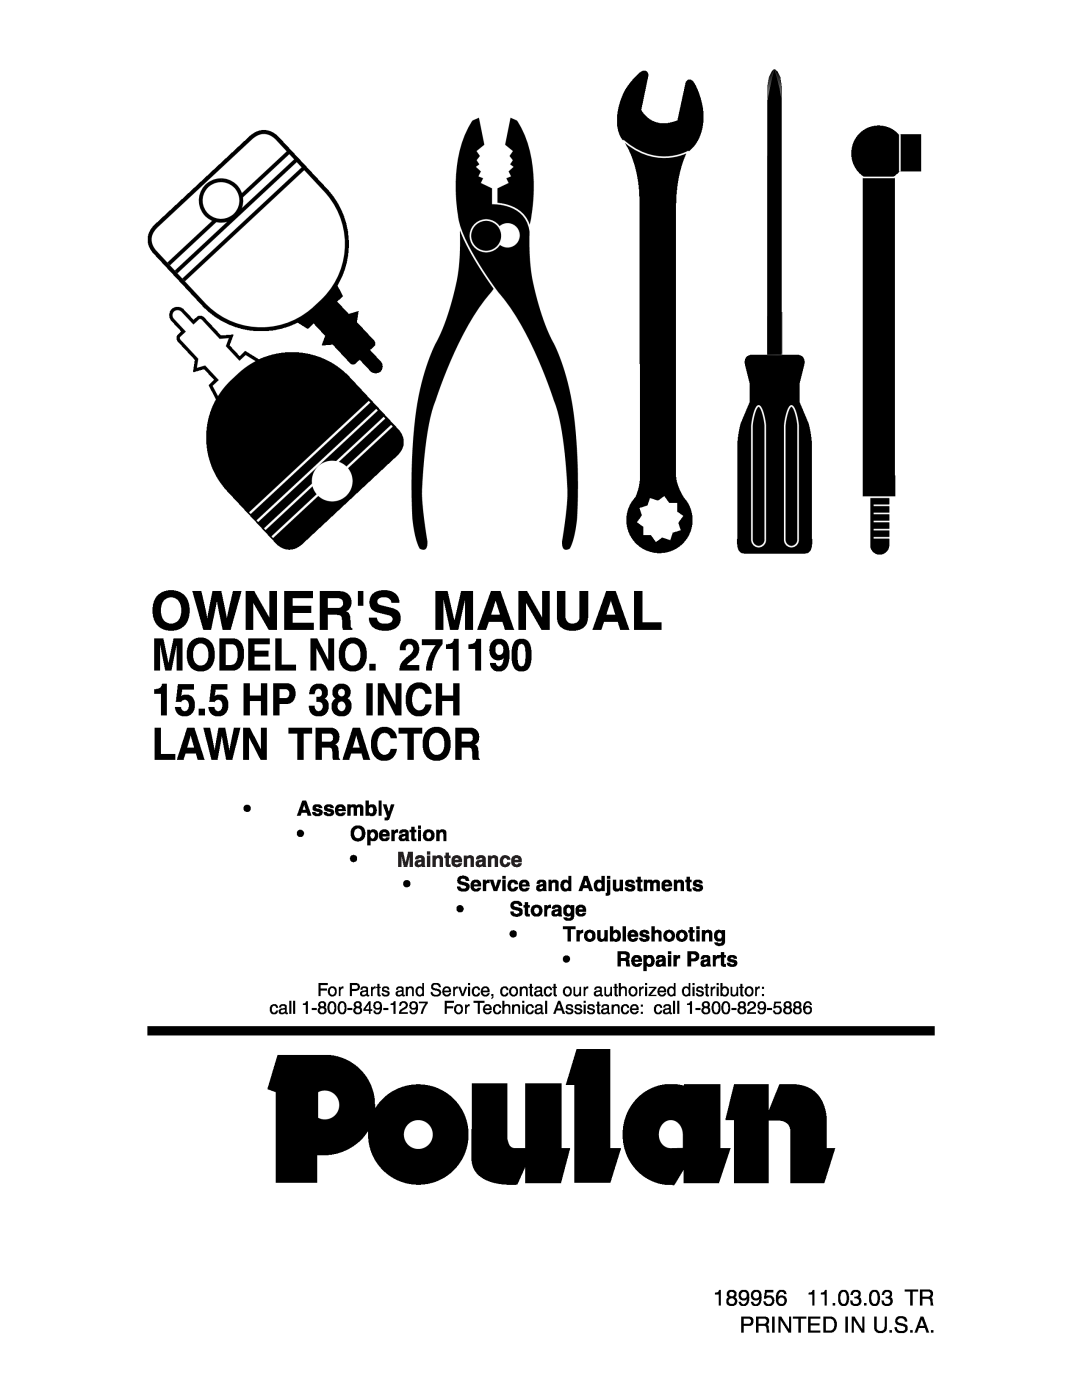 Poulan 271190 manual 189956 11.03.03 TR PRINTED IN U.S.A, Model No, 15.5 HP 38 INCH LAWN TRACTOR 